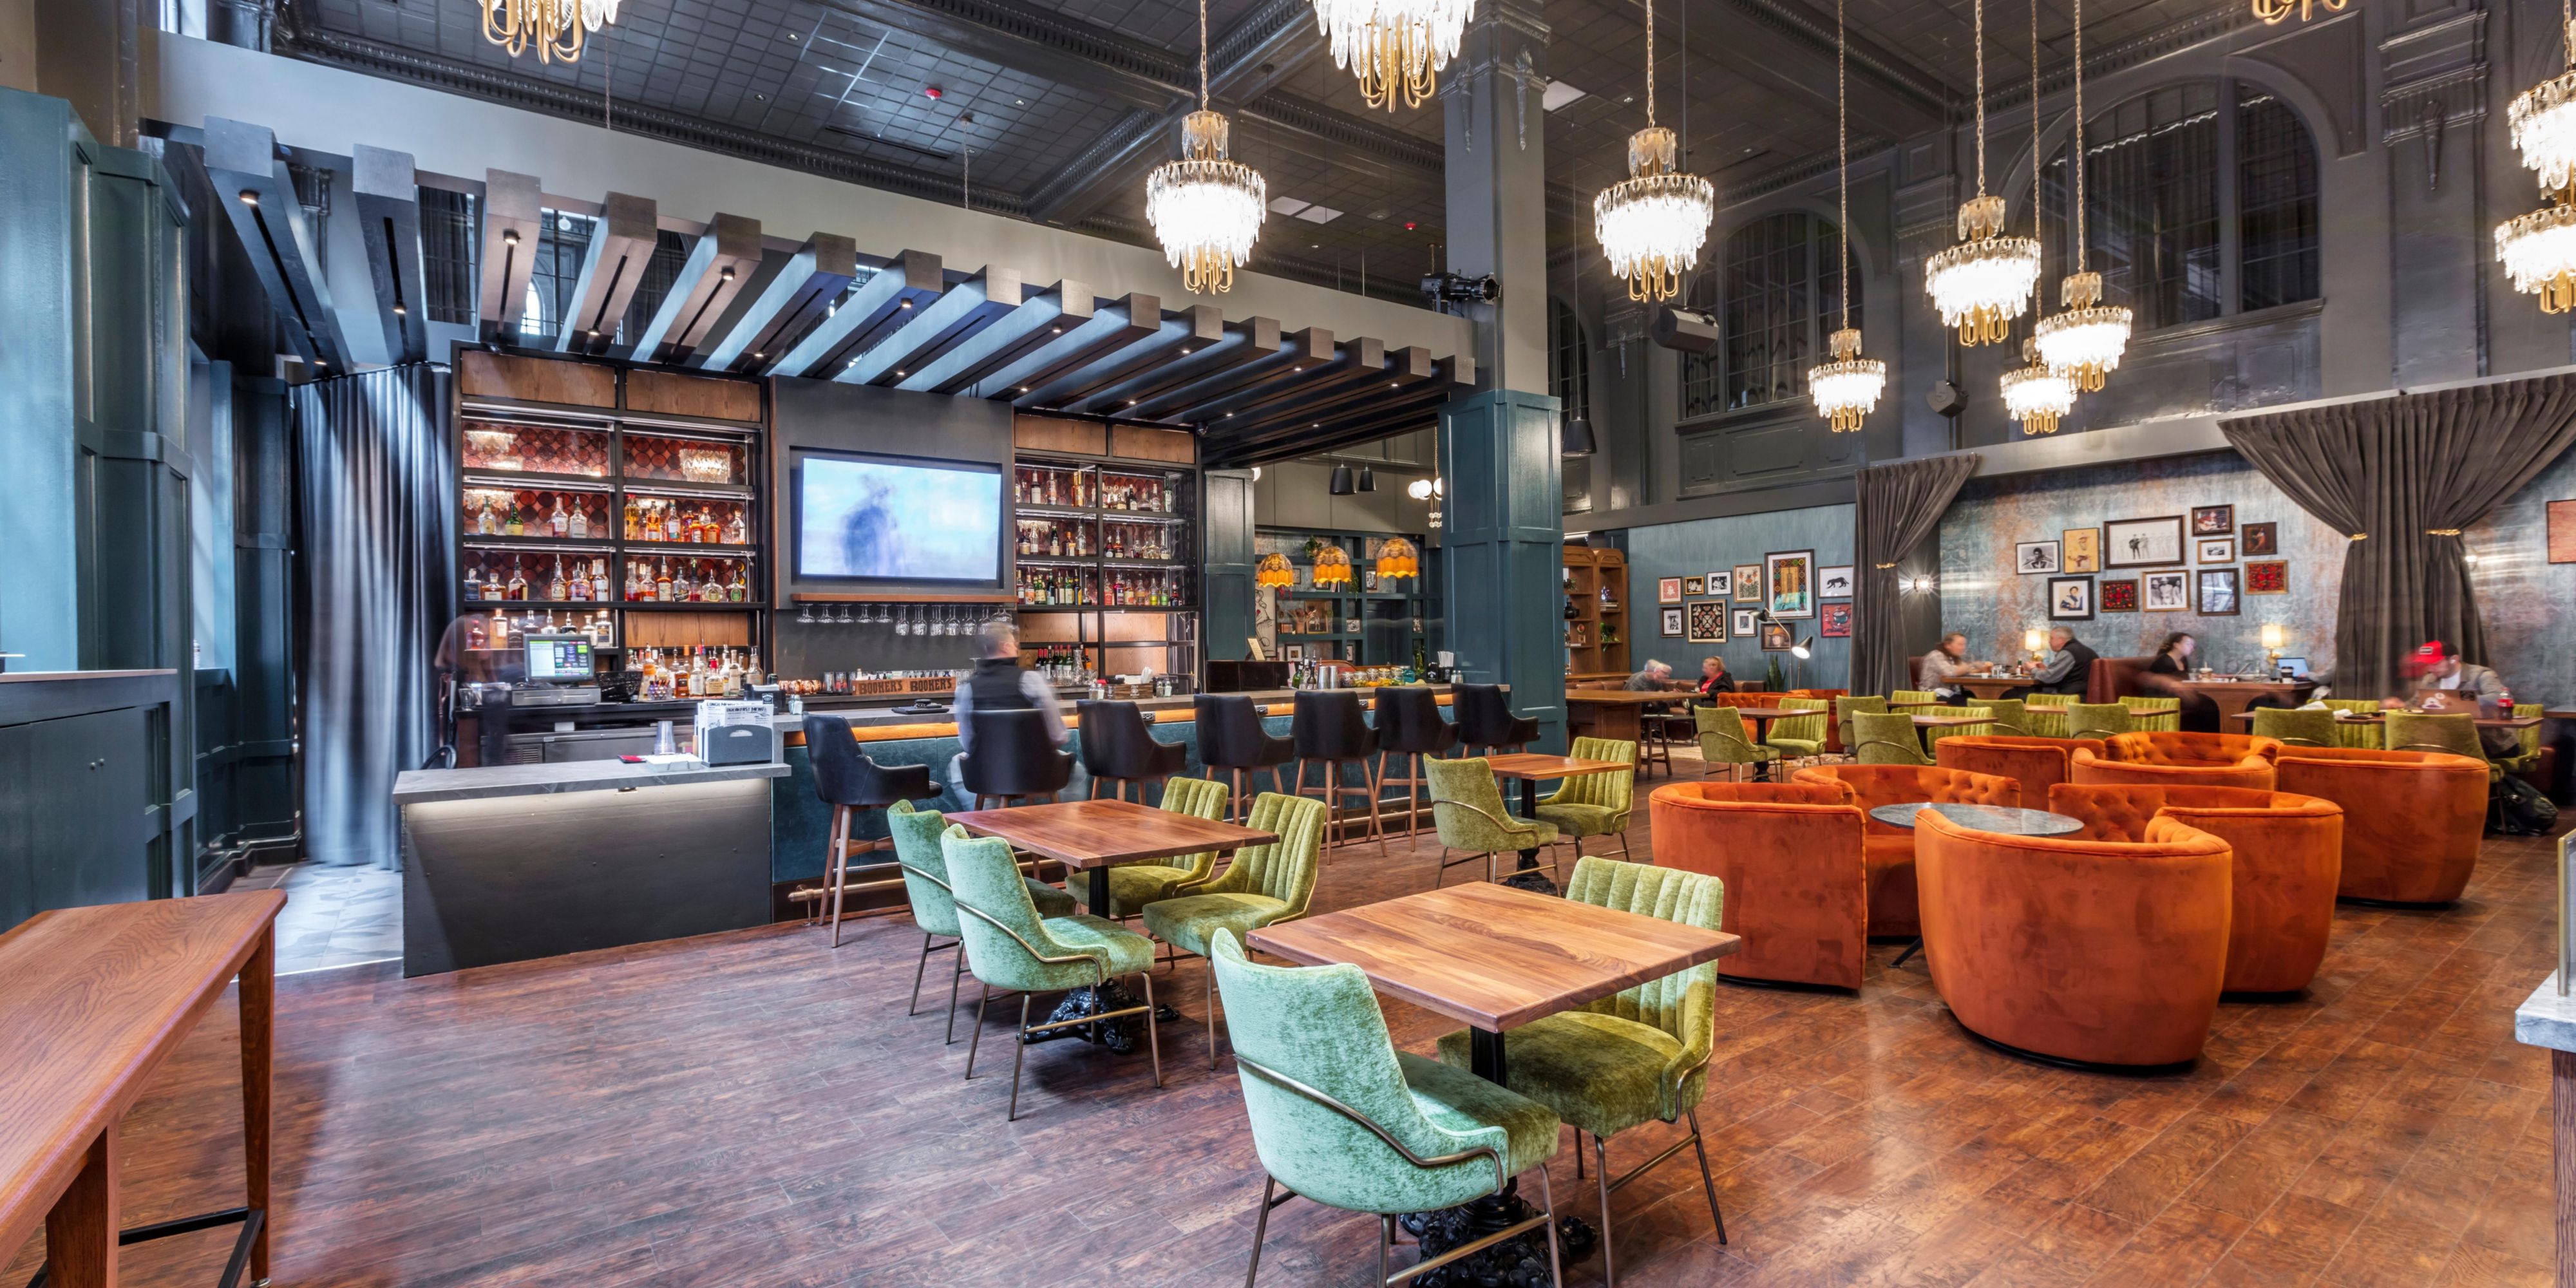 Visit our renovated restaurant, the District Bar and Kitchen.